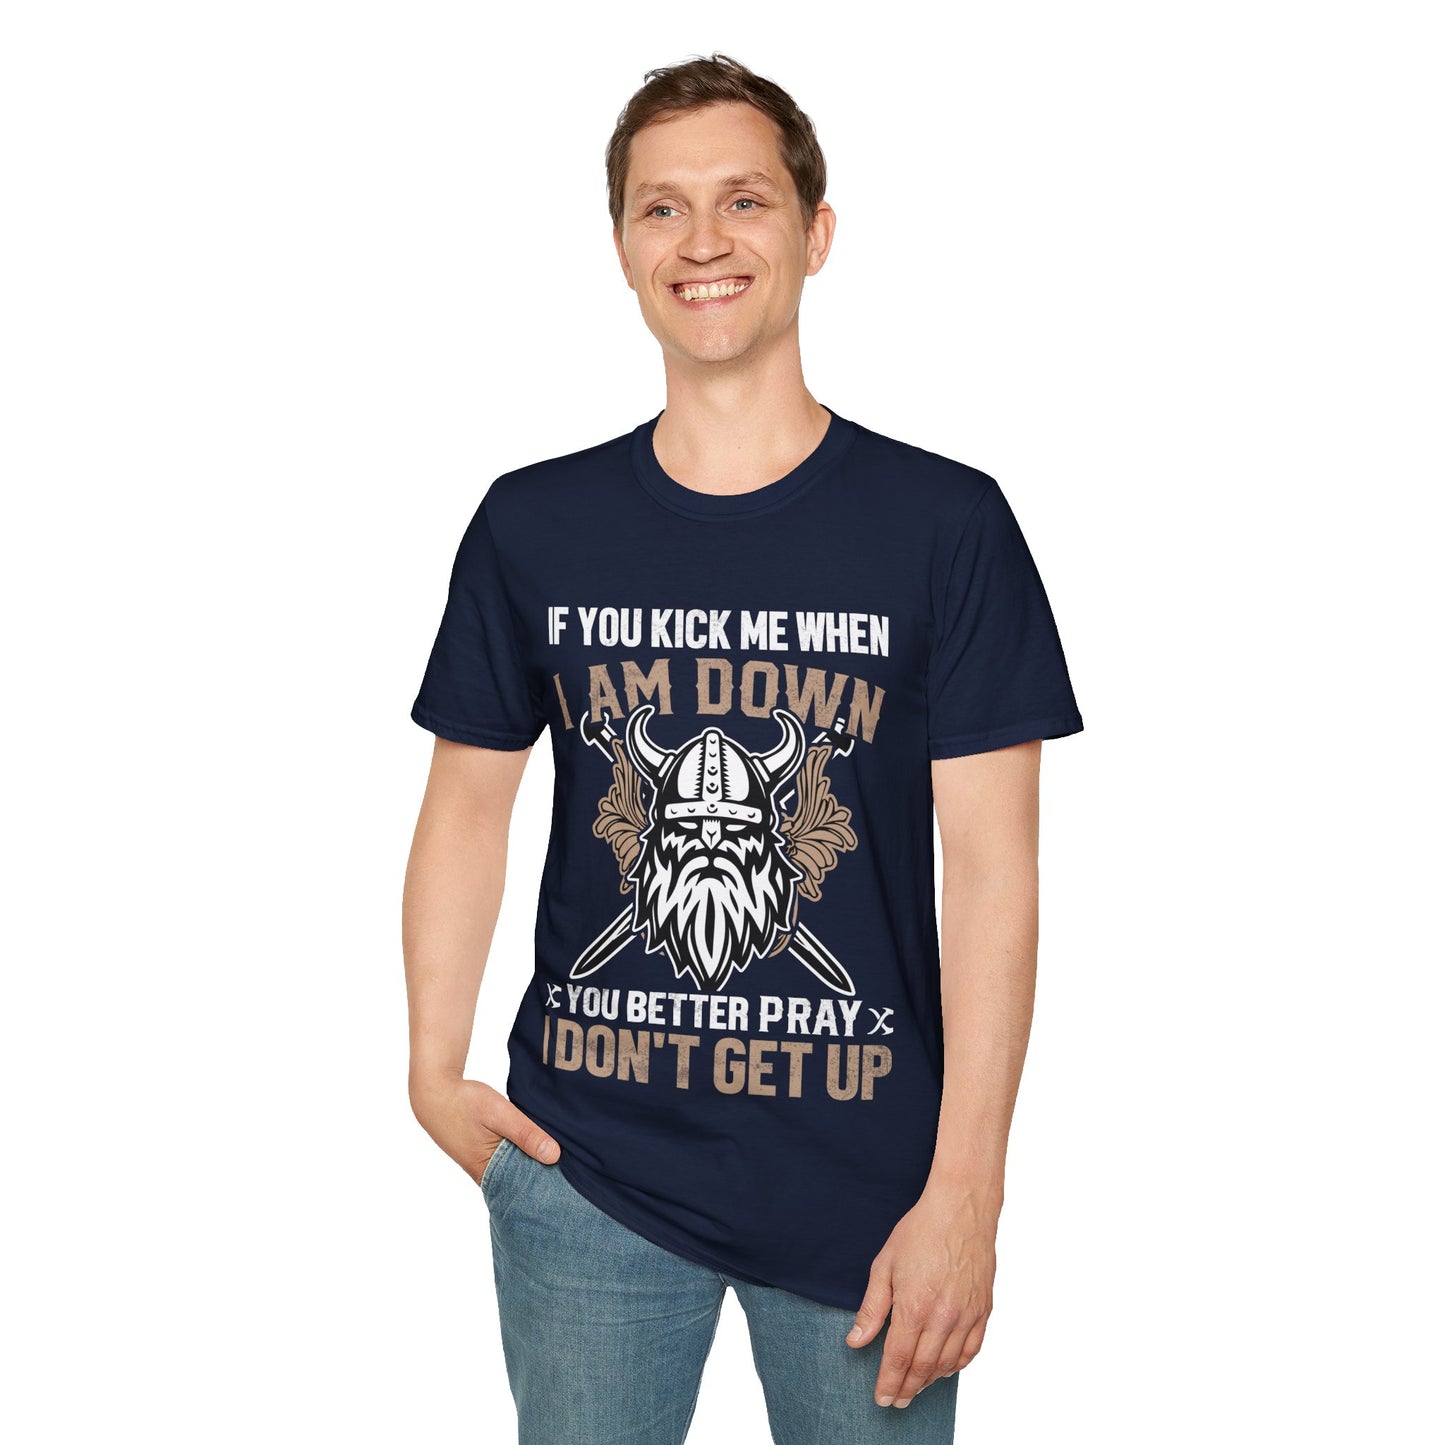 If You Kick Me When I Am Down You Better Pray I don't Get Up T-Shirt